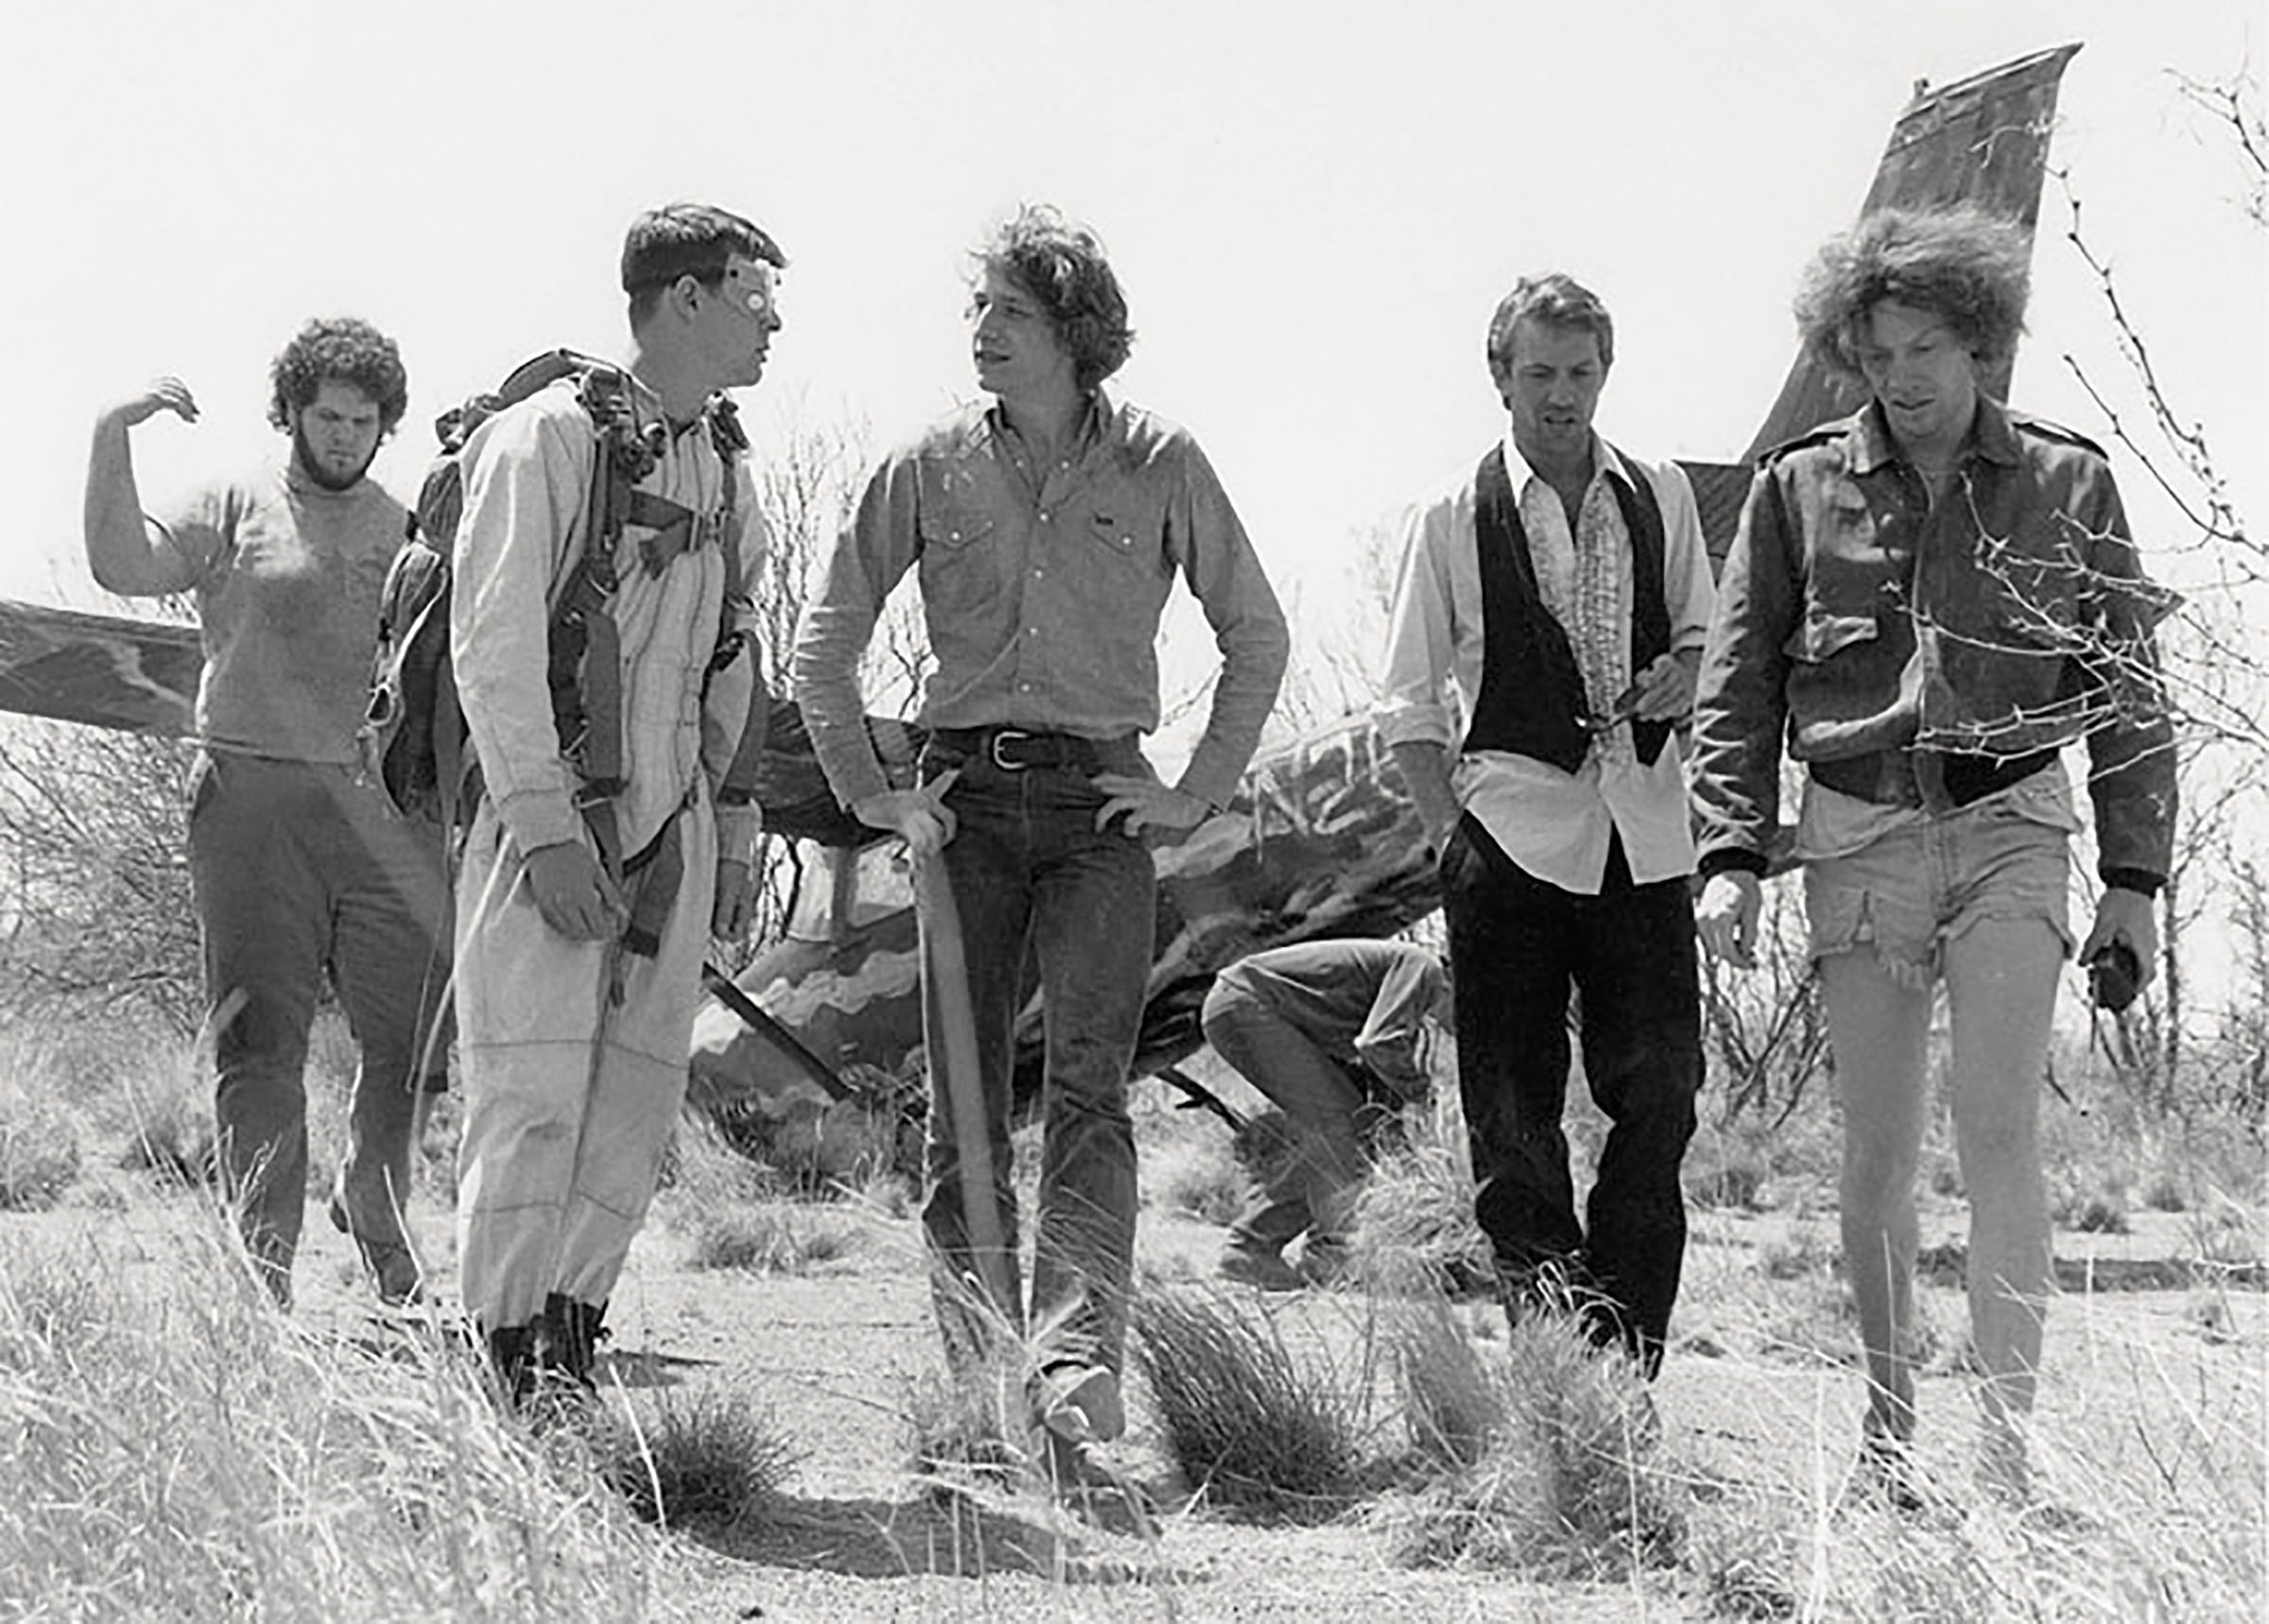 A black and white screen capture of a group of men in front of an airplane